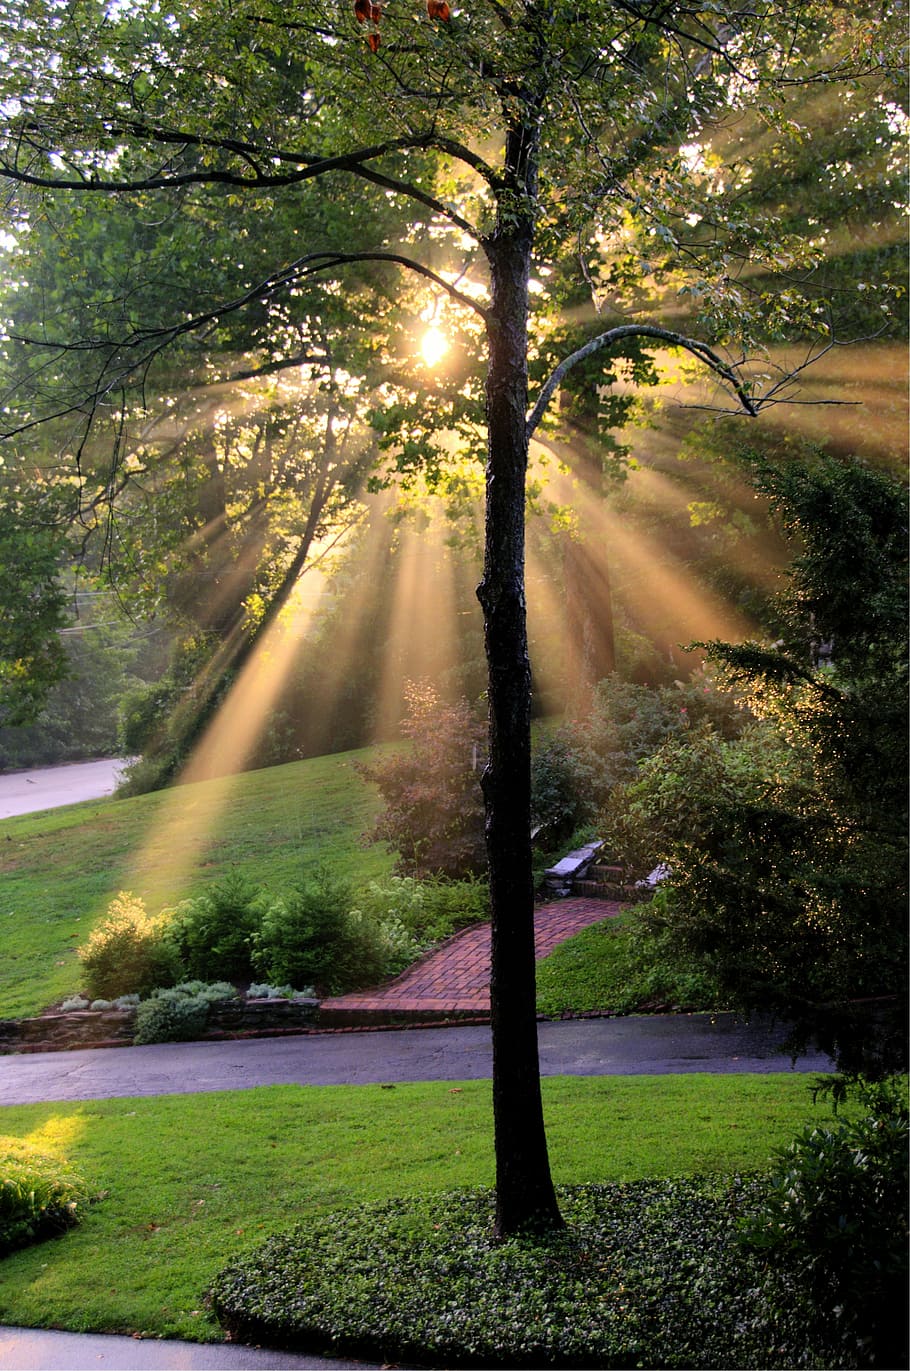 trees, pass, crepuscular rays, tree, nature, sun, sunlight, outside, rays, park - Man Made Space